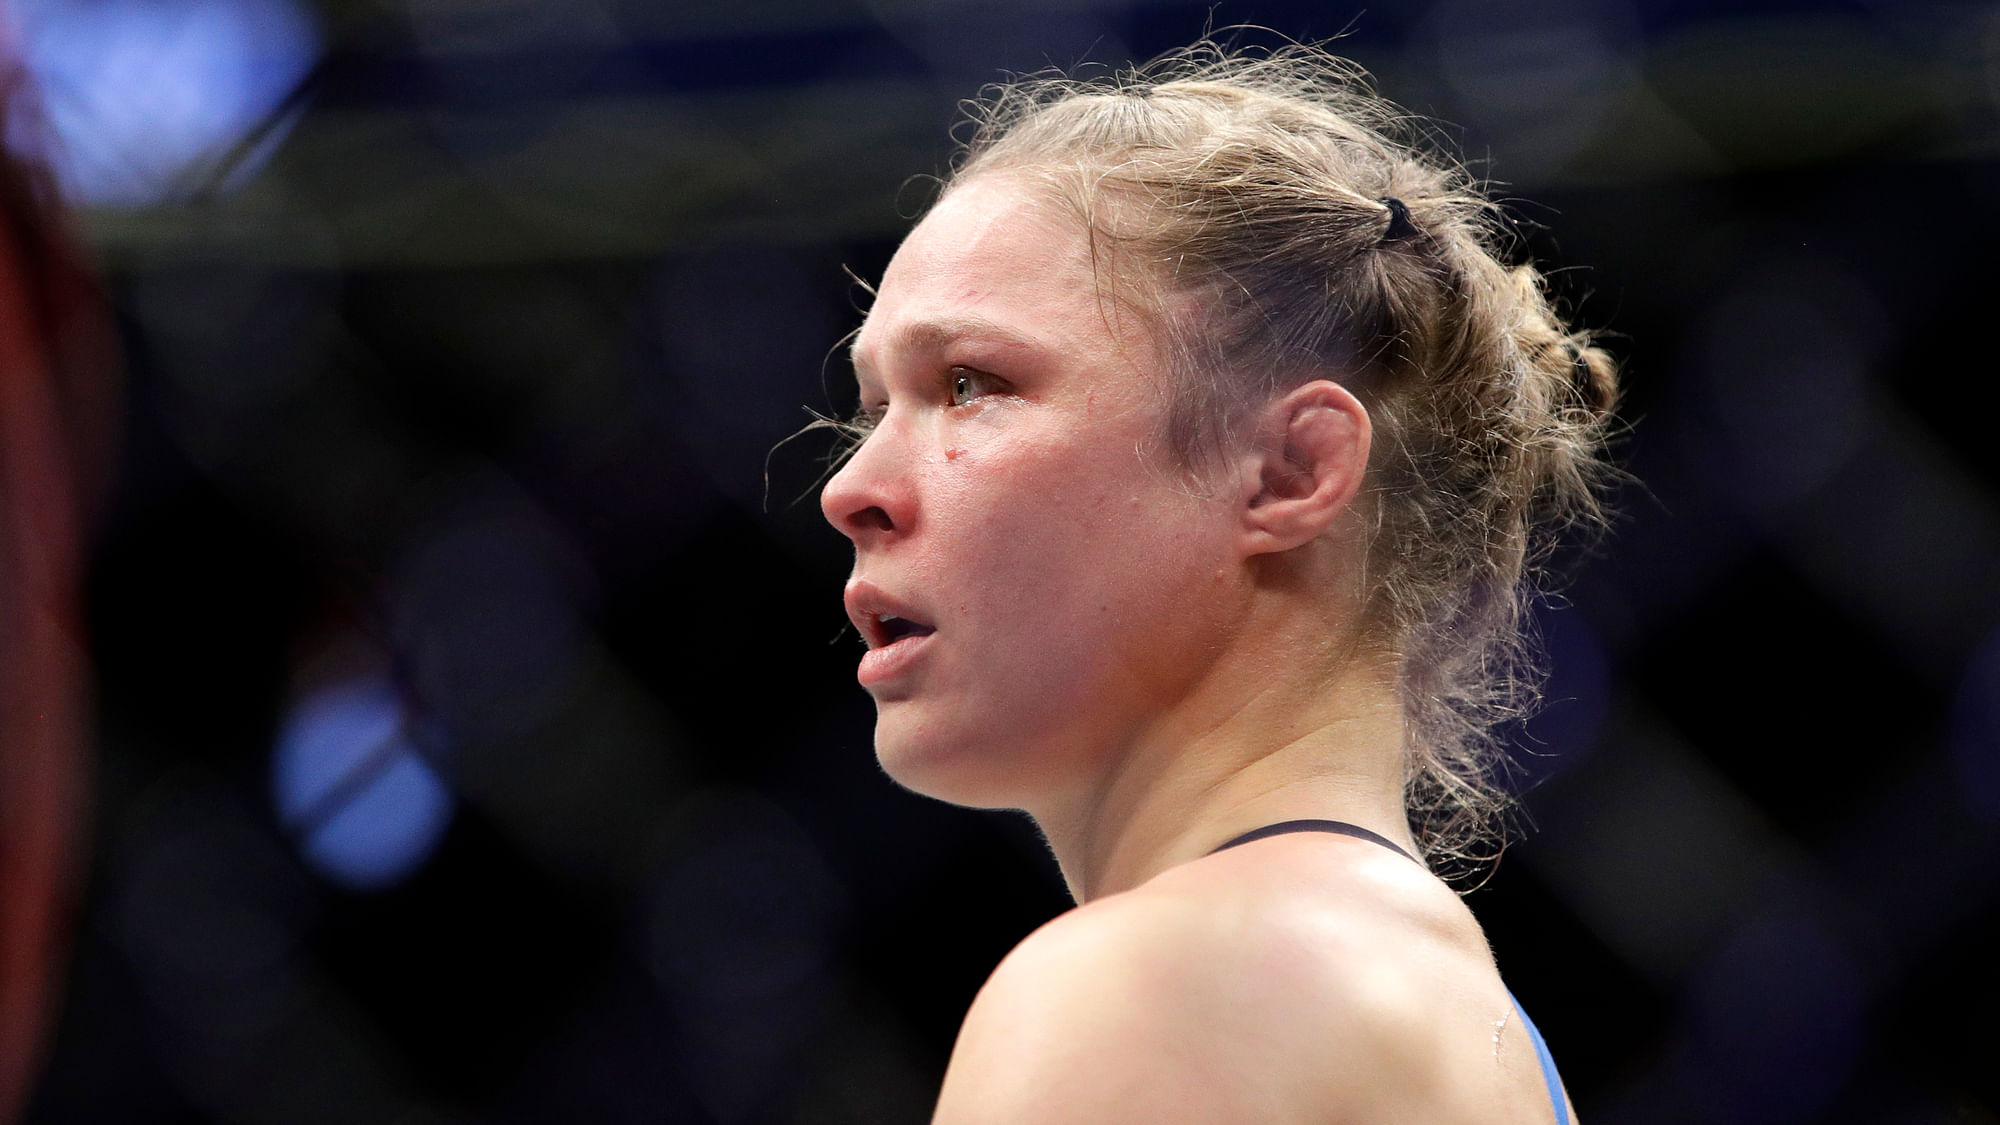 In this Dec. 30, 2016, file photo Ronda Rousey stands in the cage after Amanda Nunes forced a stoppage in the first round of their women’s bantamweight championship mixed martial arts bout at UFC 207 in Las Vegas. Rousey’s next fight could come in a WWE ring.